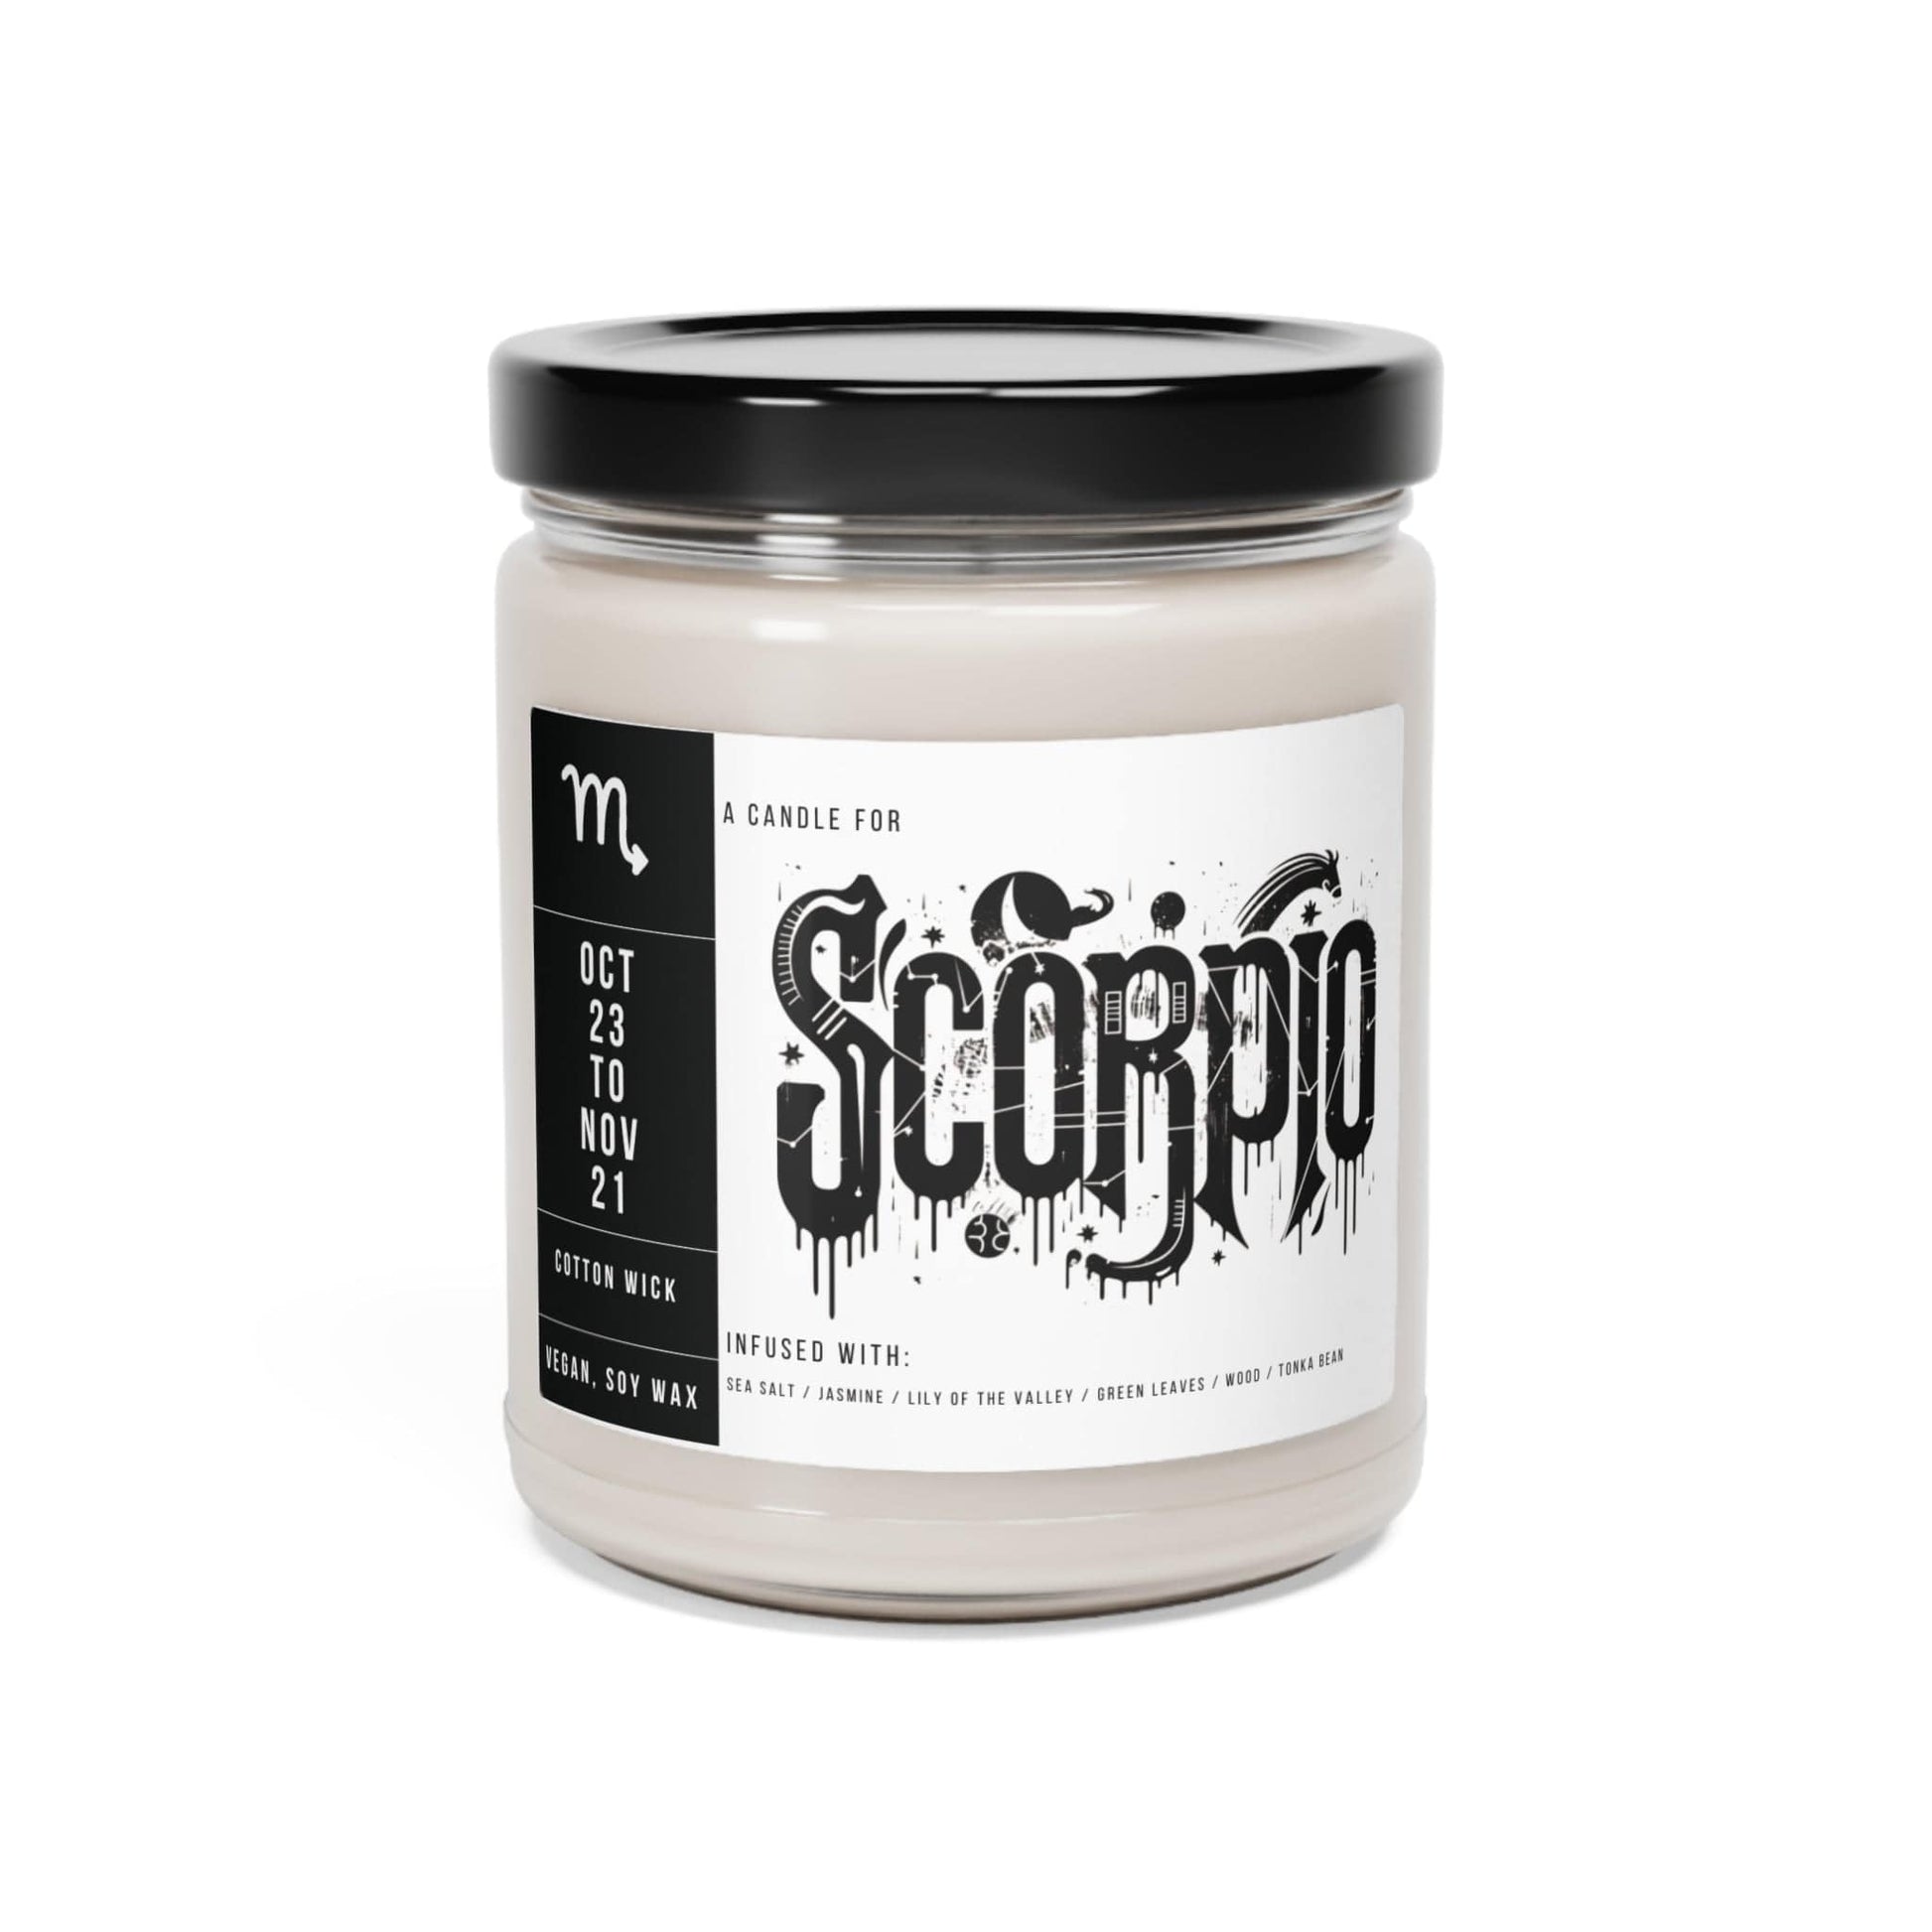 Home Decor Sea Salt + Orchid / 9oz Scorpio Zodiac Scented Soy Candle Collection – Mysteries of the Scorpion